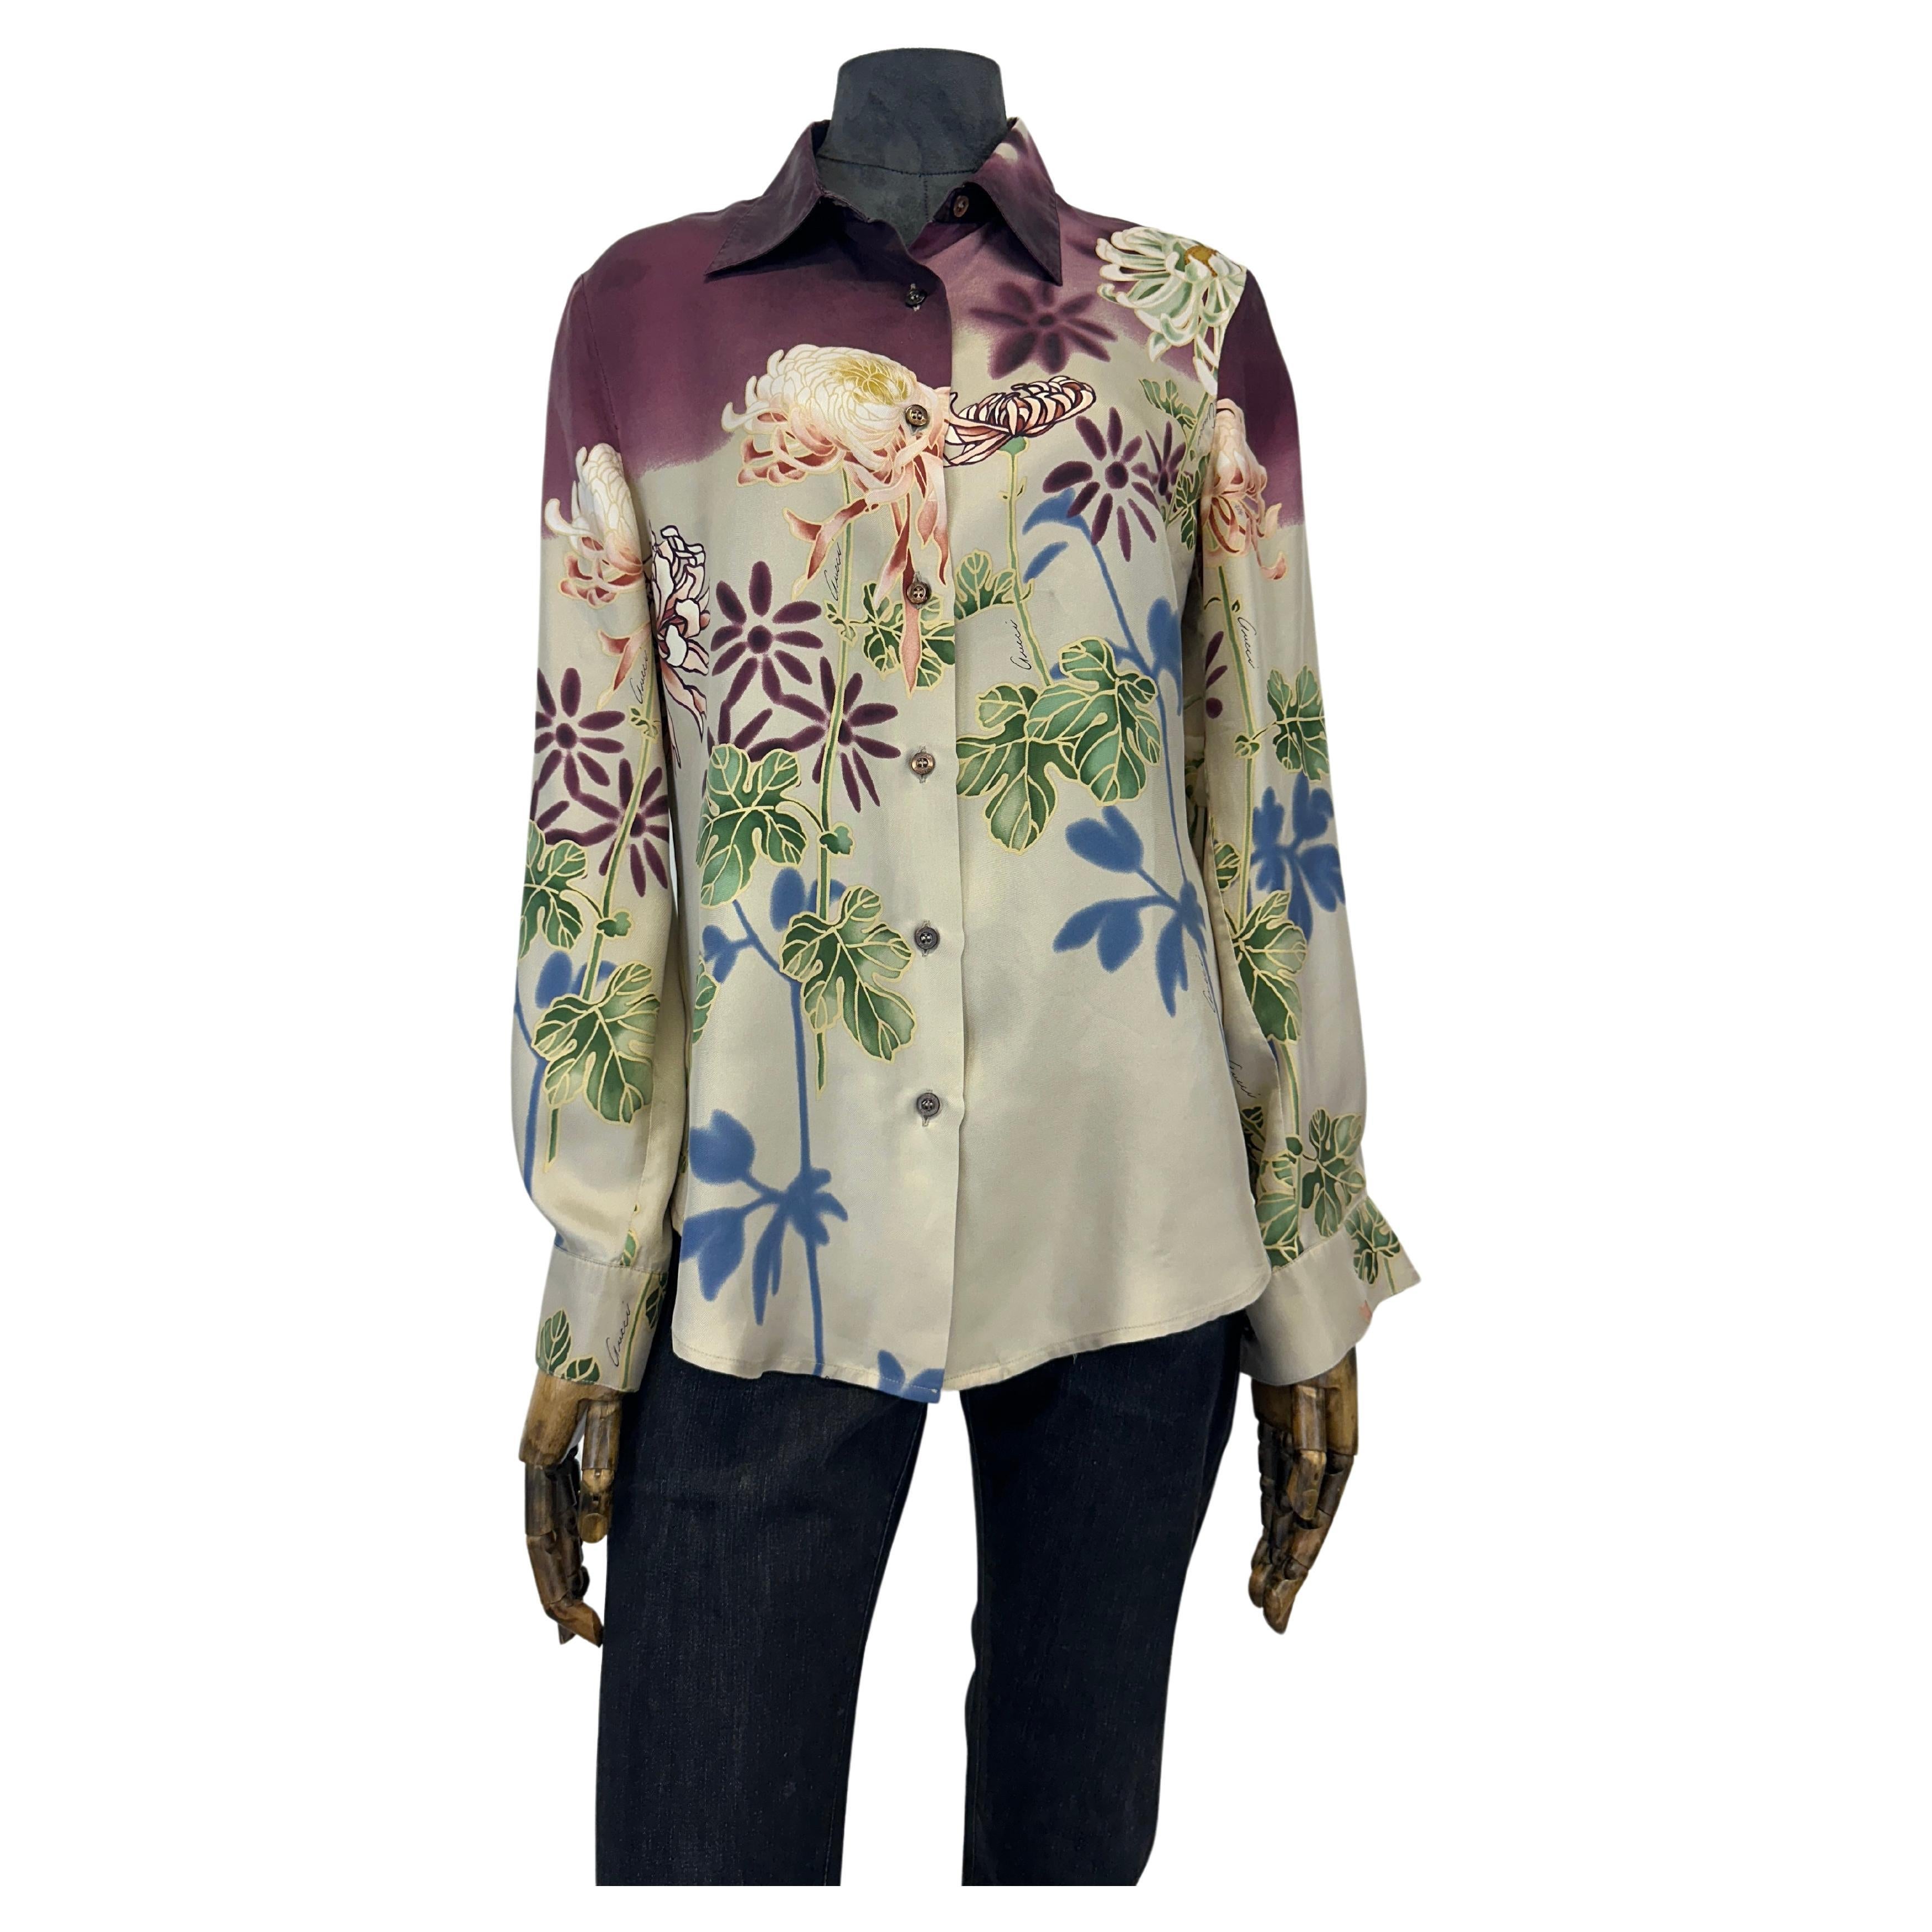 S/S 2001 Gucci by Tom Ford Chrysanthemum silk shirt For Sale